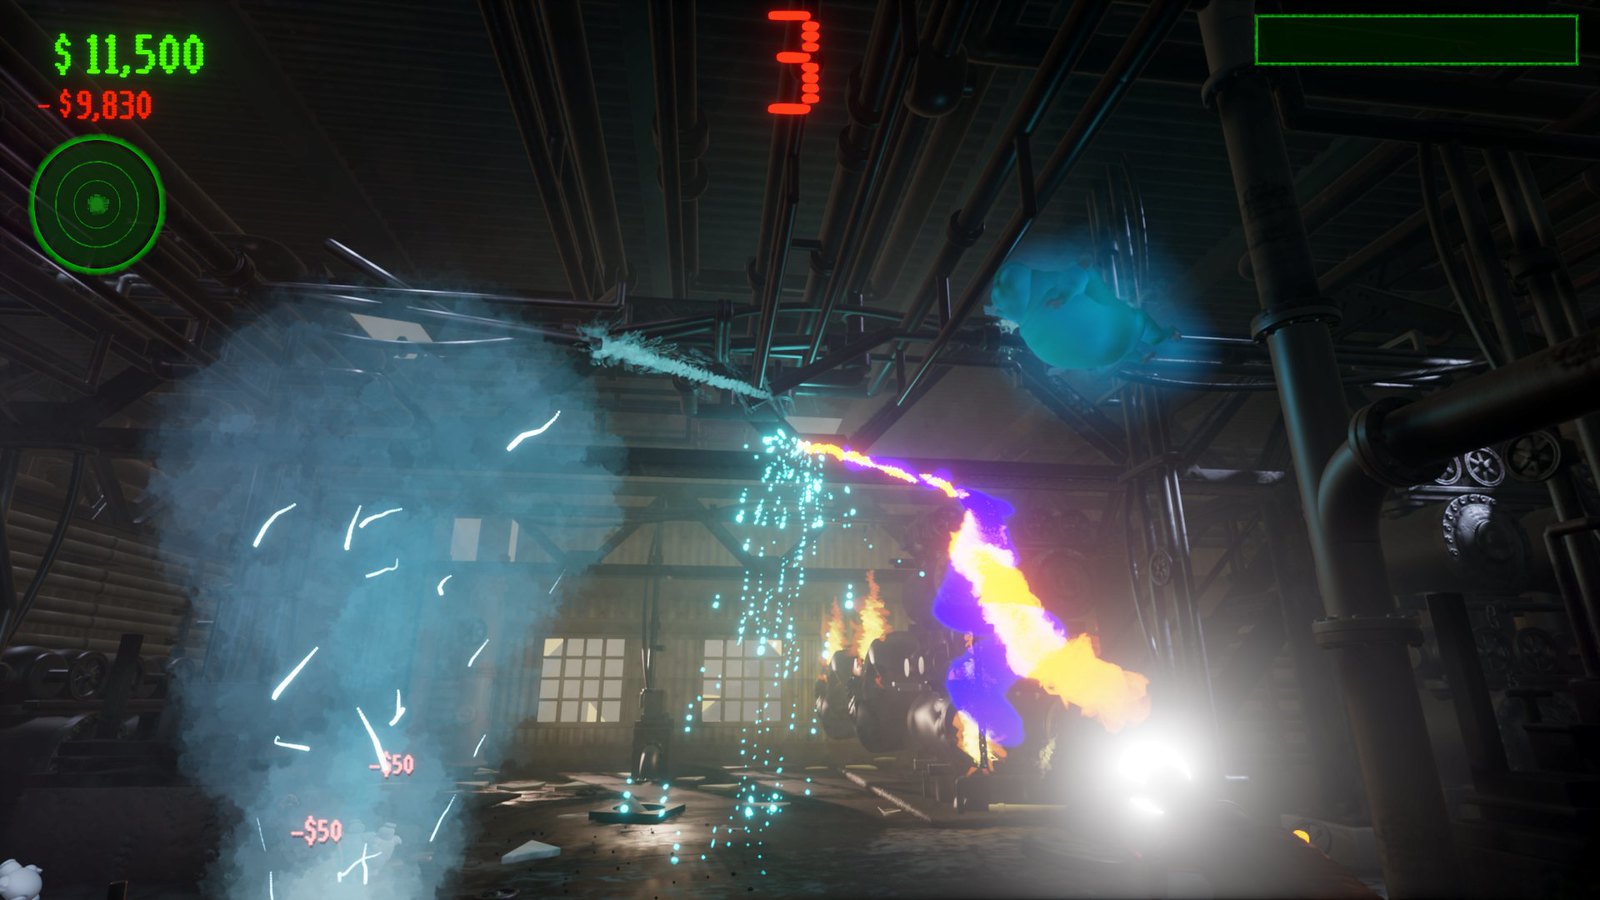 A screenshot of a player using their blue and yellow proton beam to destroy the environment in Ghostbusters Afterlife In Dreams.